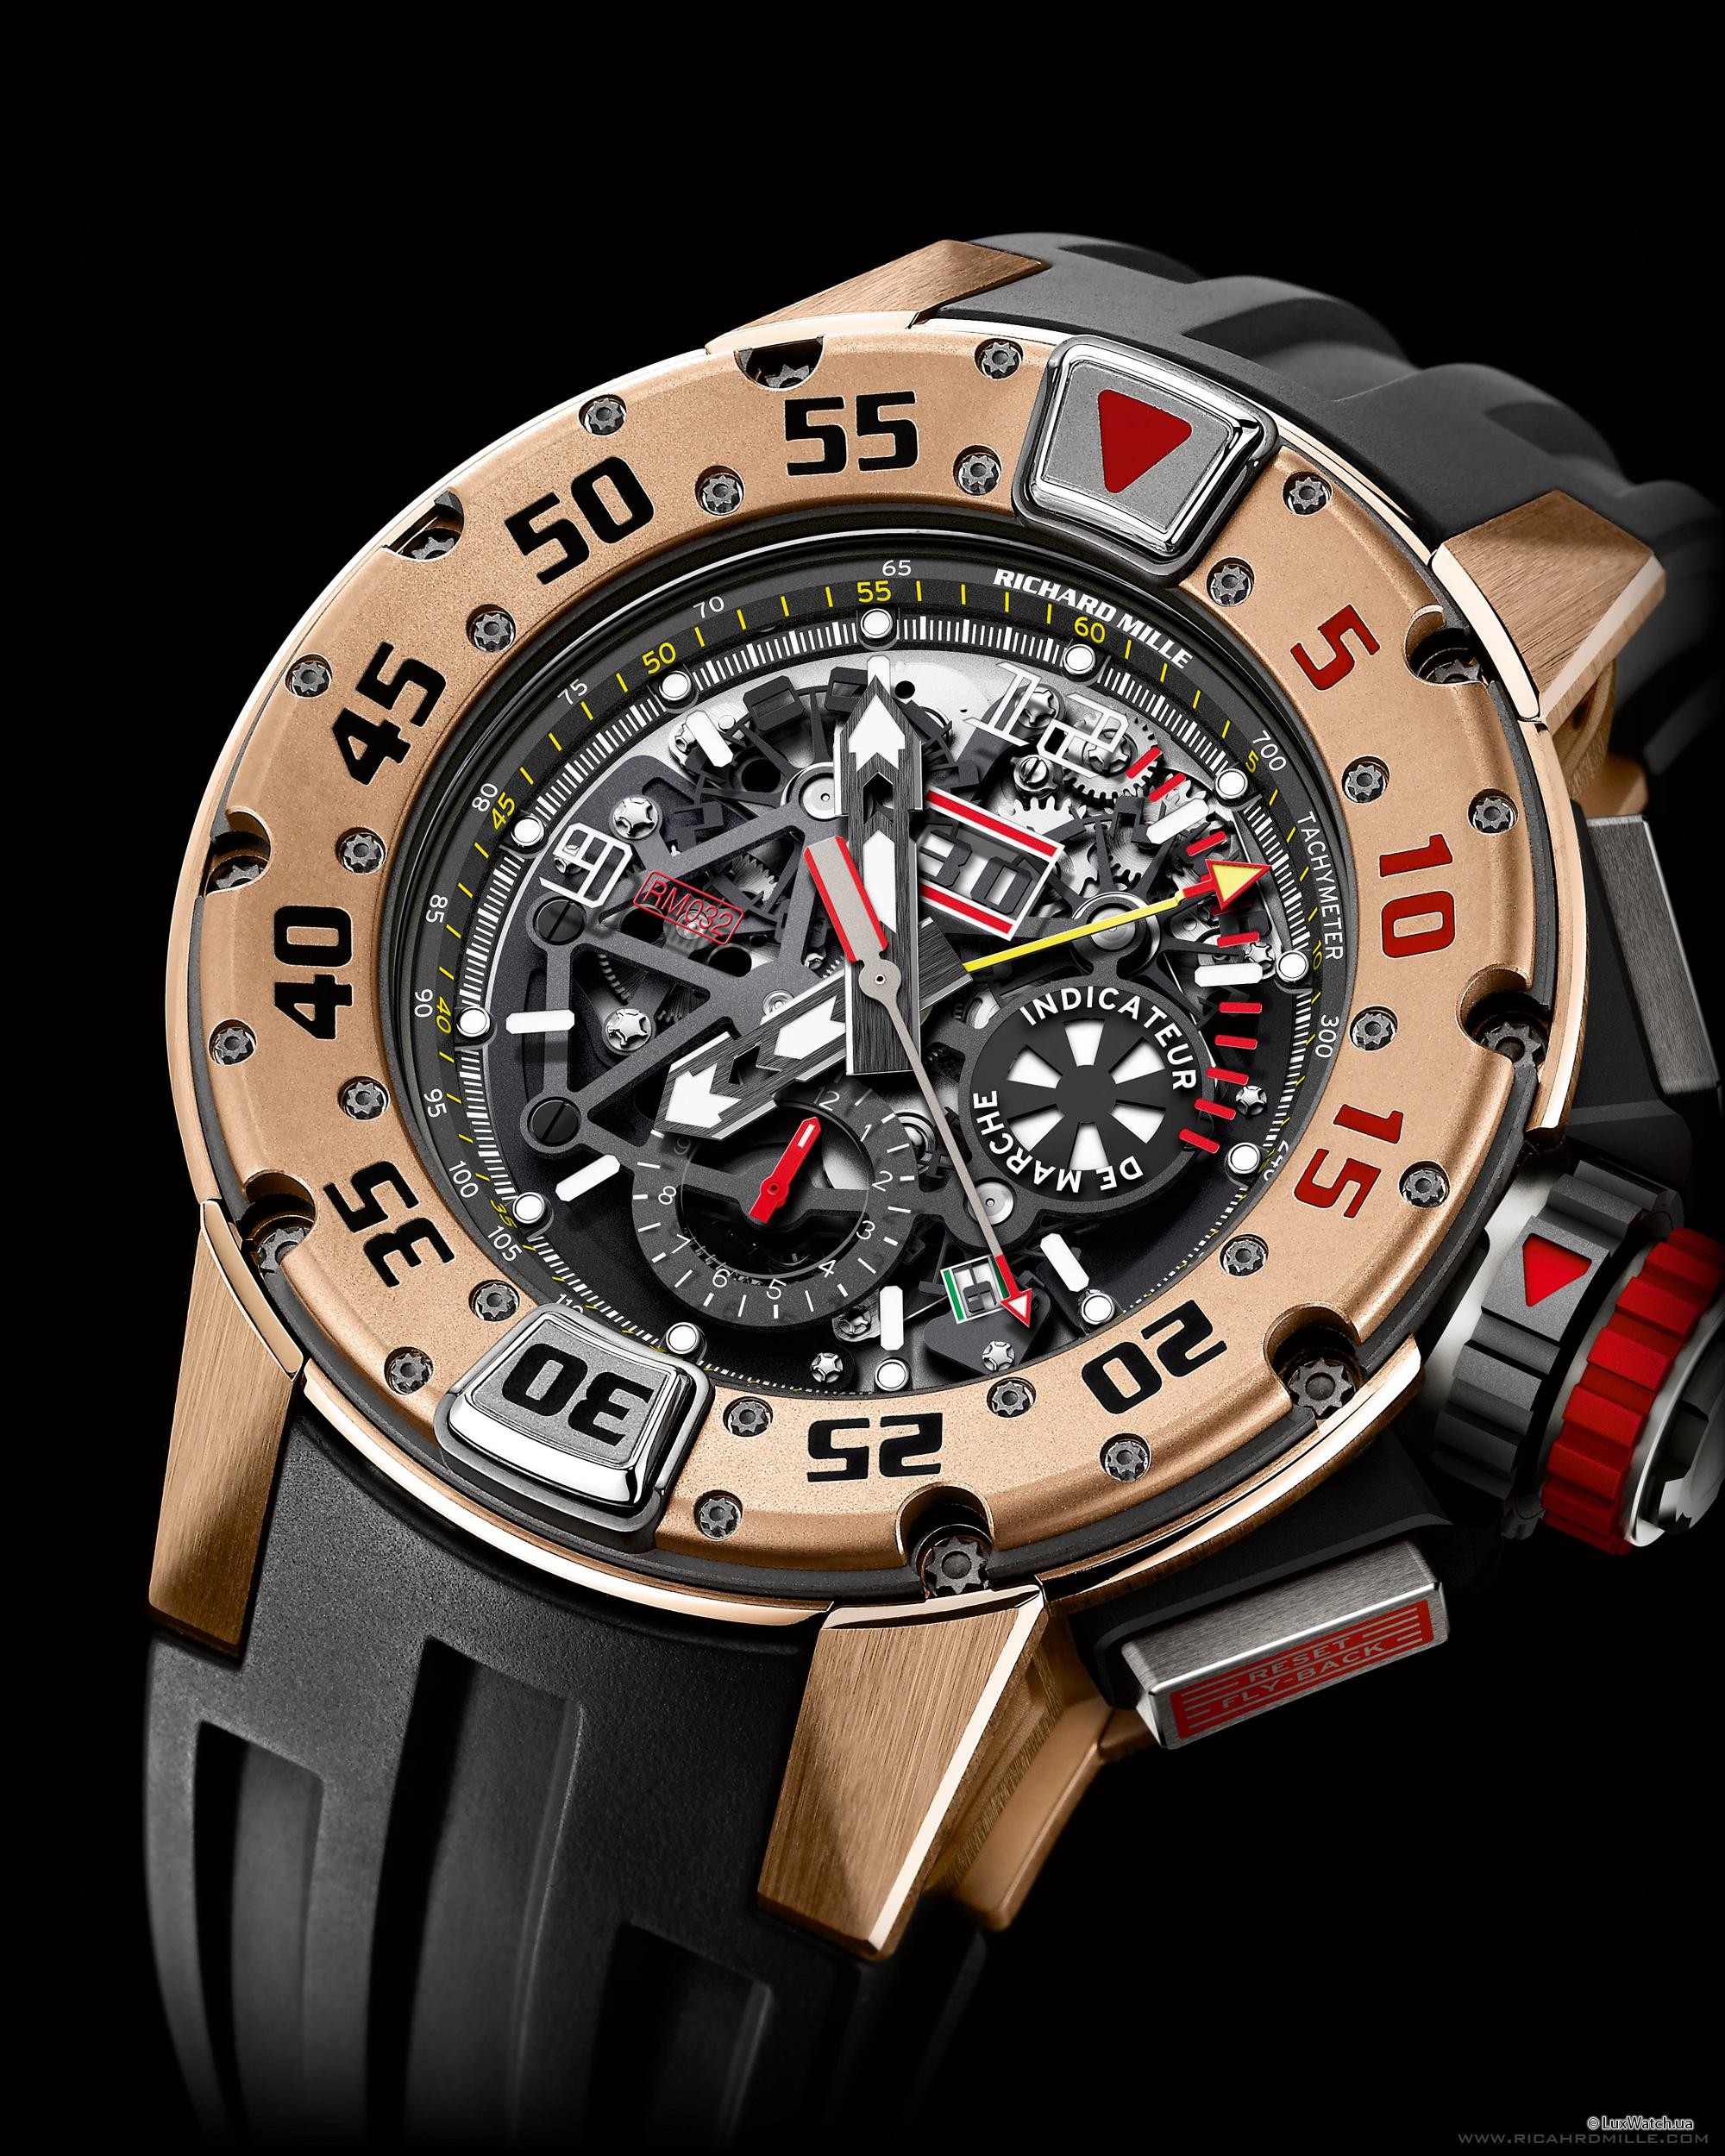 Richard-Mille-Watches-RM-032-Chronograph-Diver-s-RM-032-Rose-Gold- 4